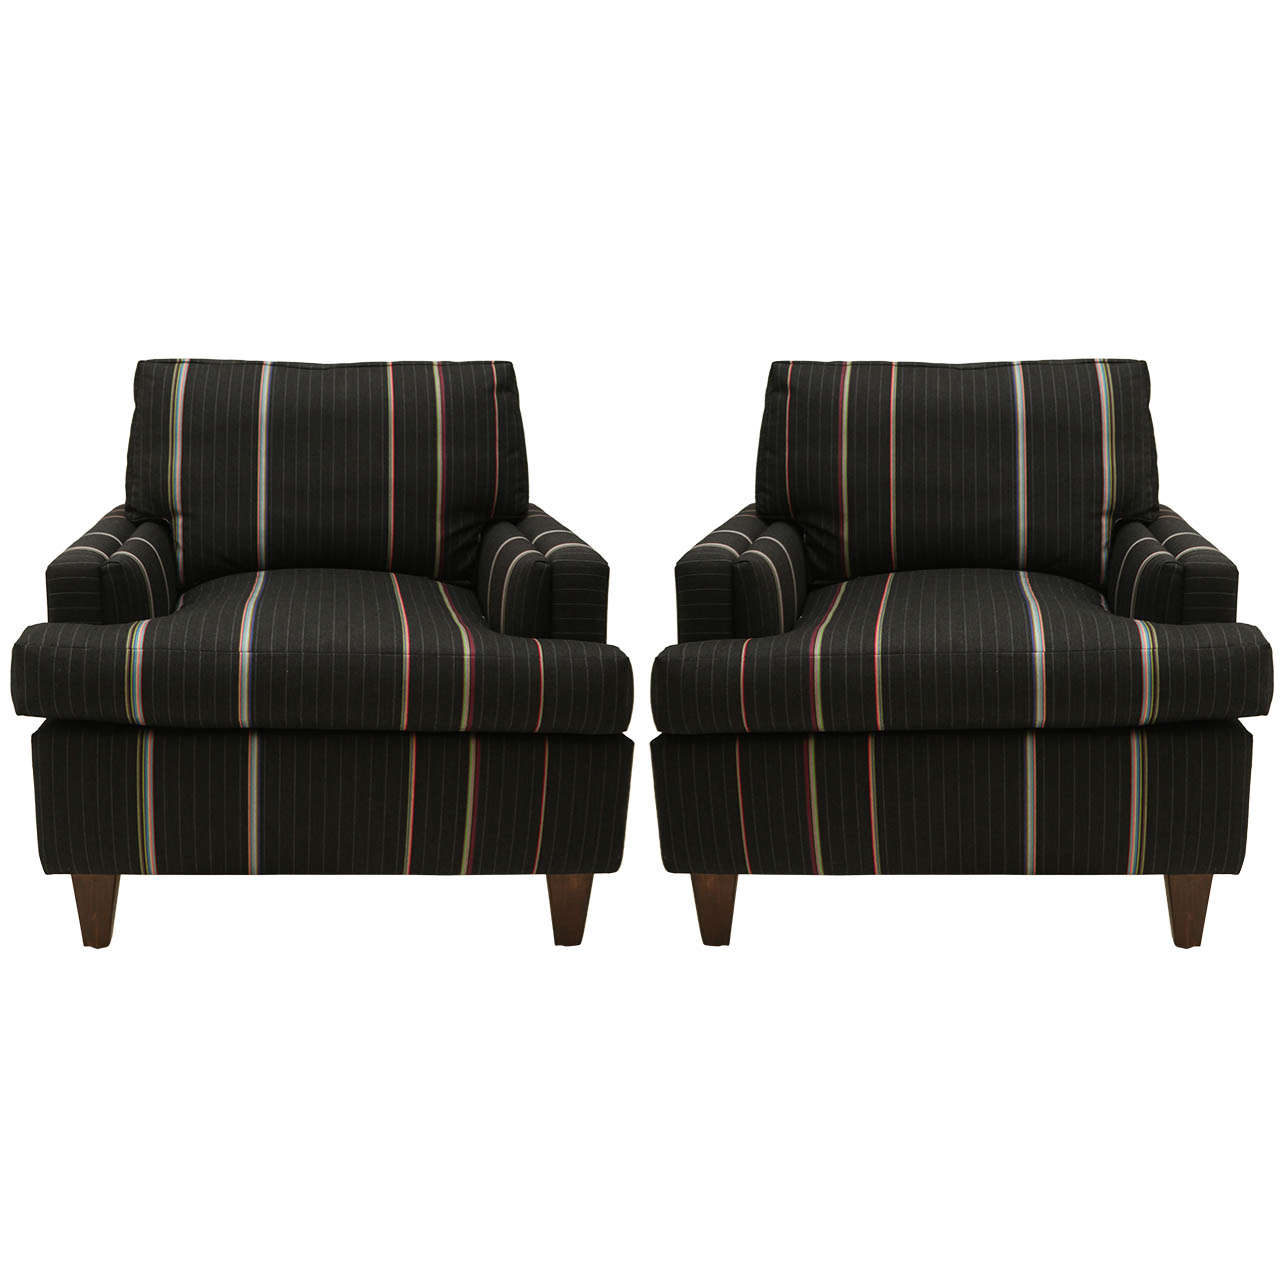 Handsome Pair of "Ledge Back" Club Chairs